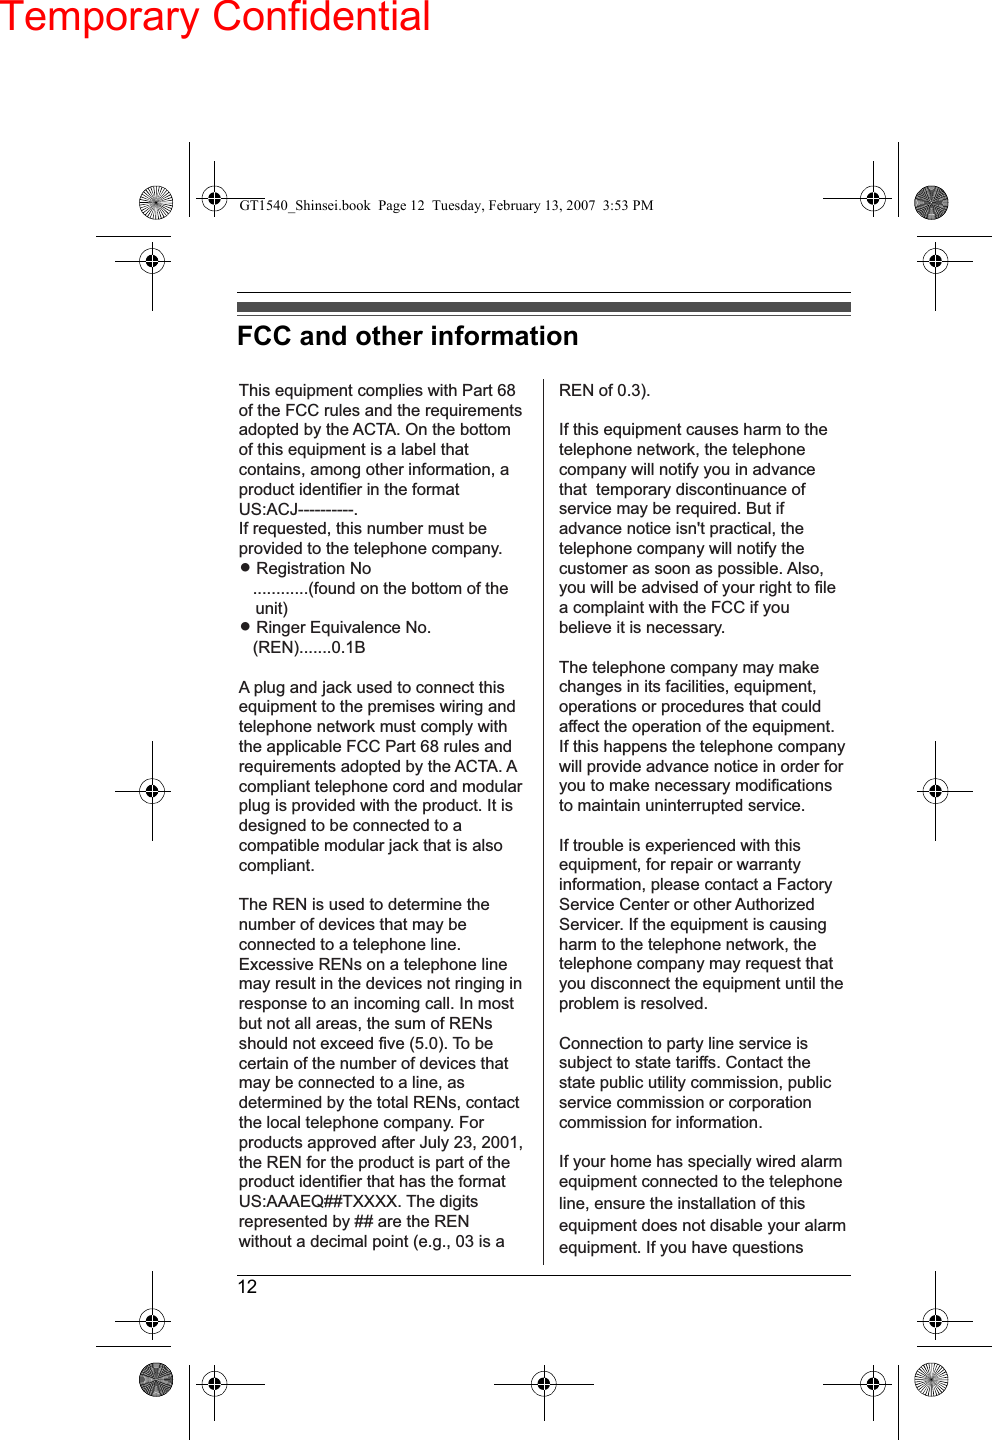 Temporary Confidential12FCC and other informationThis equipment complies with Part 68 of the FCC rules and the requirements adopted by the ACTA. On the bottom of this equipment is a label that contains, among other information, a product identifier in the format US:ACJ----------.If requested, this number must be provided to the telephone company.L Registration No   ............(found on the bottom of the unit)L Ringer Equivalence No.   (REN).......0.1BA plug and jack used to connect this equipment to the premises wiring and telephone network must comply with the applicable FCC Part 68 rules and requirements adopted by the ACTA. A compliant telephone cord and modular plug is provided with the product. It is designed to be connected to a compatible modular jack that is also compliant.The REN is used to determine the number of devices that may be connected to a telephone line. Excessive RENs on a telephone line may result in the devices not ringing in response to an incoming call. In most but not all areas, the sum of RENs should not exceed five (5.0). To be certain of the number of devices that may be connected to a line, as determined by the total RENs, contact the local telephone company. For products approved after July 23, 2001, the REN for the product is part of the product identifier that has the format US:AAAEQ##TXXXX. The digits represented by ## are the REN without a decimal point (e.g., 03 is a REN of 0.3).If this equipment causes harm to the telephone network, the telephone company will notify you in advance that  temporary discontinuance of service may be required. But if advance notice isn&apos;t practical, the telephone company will notify the customer as soon as possible. Also, you will be advised of your right to file a complaint with the FCC if you believe it is necessary.The telephone company may make changes in its facilities, equipment, operations or procedures that could affect the operation of the equipment. If this happens the telephone company will provide advance notice in order for you to make necessary modifications to maintain uninterrupted service.If trouble is experienced with this equipment, for repair or warranty information, please contact a Factory Service Center or other Authorized Servicer. If the equipment is causing harm to the telephone network, the telephone company may request that you disconnect the equipment until the problem is resolved.Connection to party line service is subject to state tariffs. Contact the state public utility commission, public service commission or corporation commission for information.If your home has specially wired alarm equipment connected to the telephone line, ensure the installation of this equipment does not disable your alarm equipment. If you have questions GT1540_Shinsei.book  Page 12  Tuesday, February 13, 2007  3:53 PM